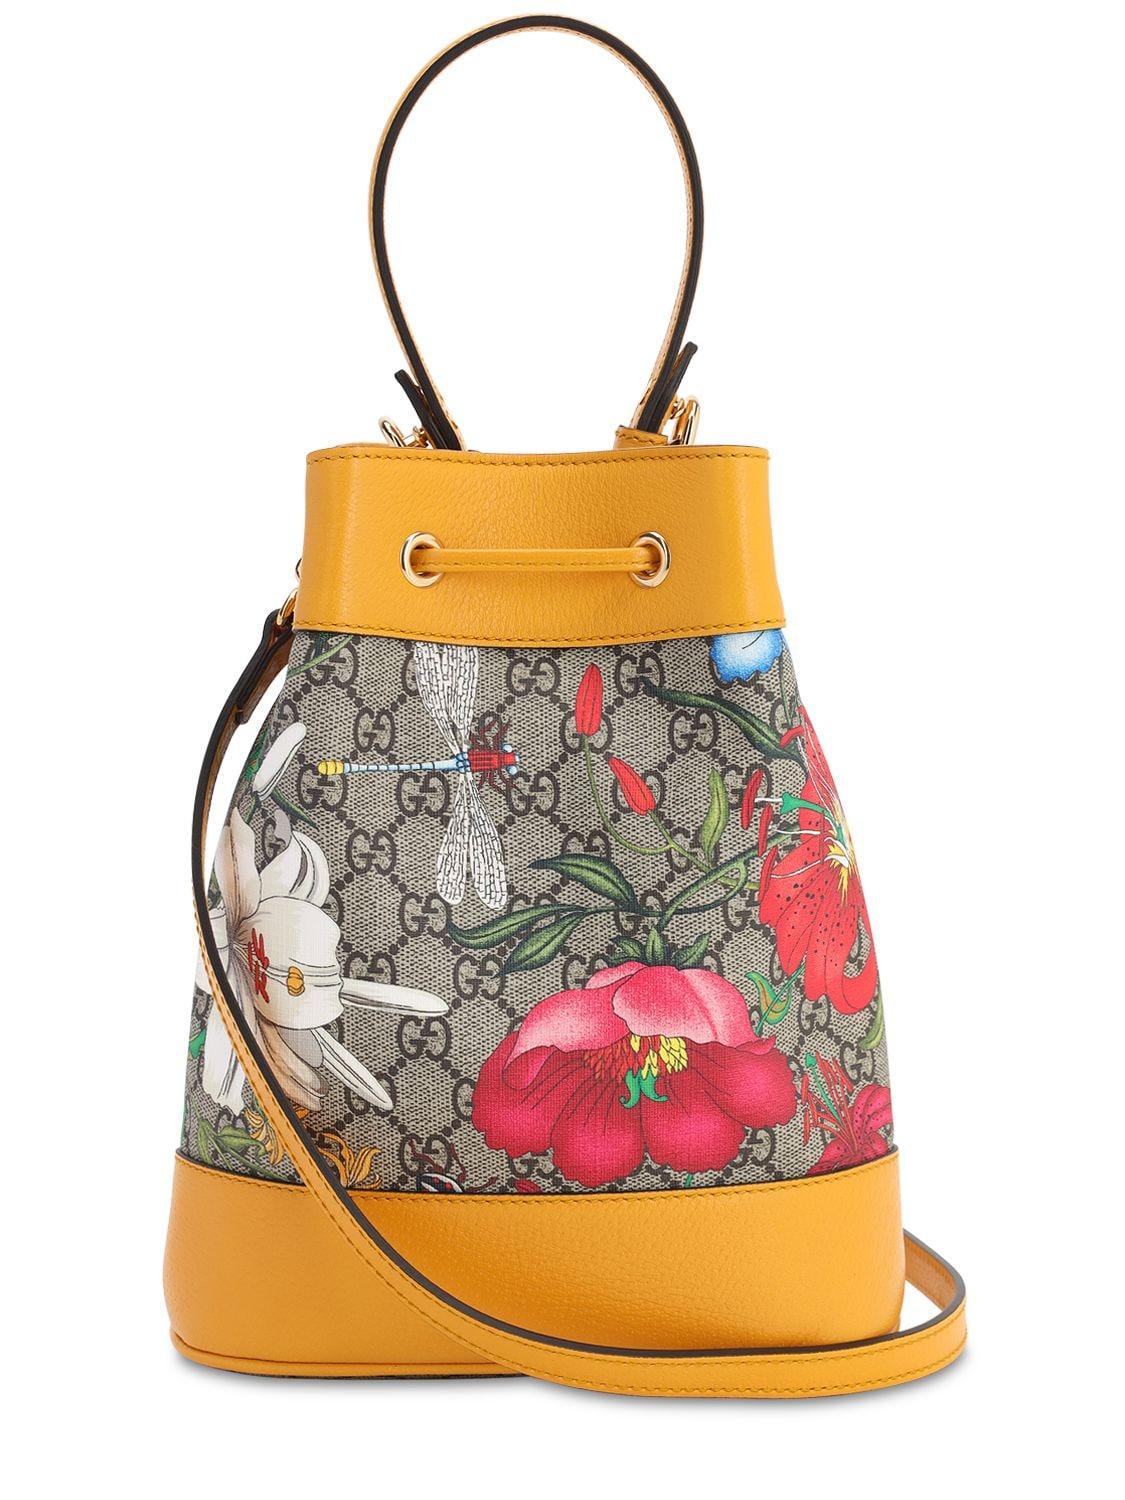 Gucci Ophidia GG Flora Small Bucket Bag in Yellow | Lyst